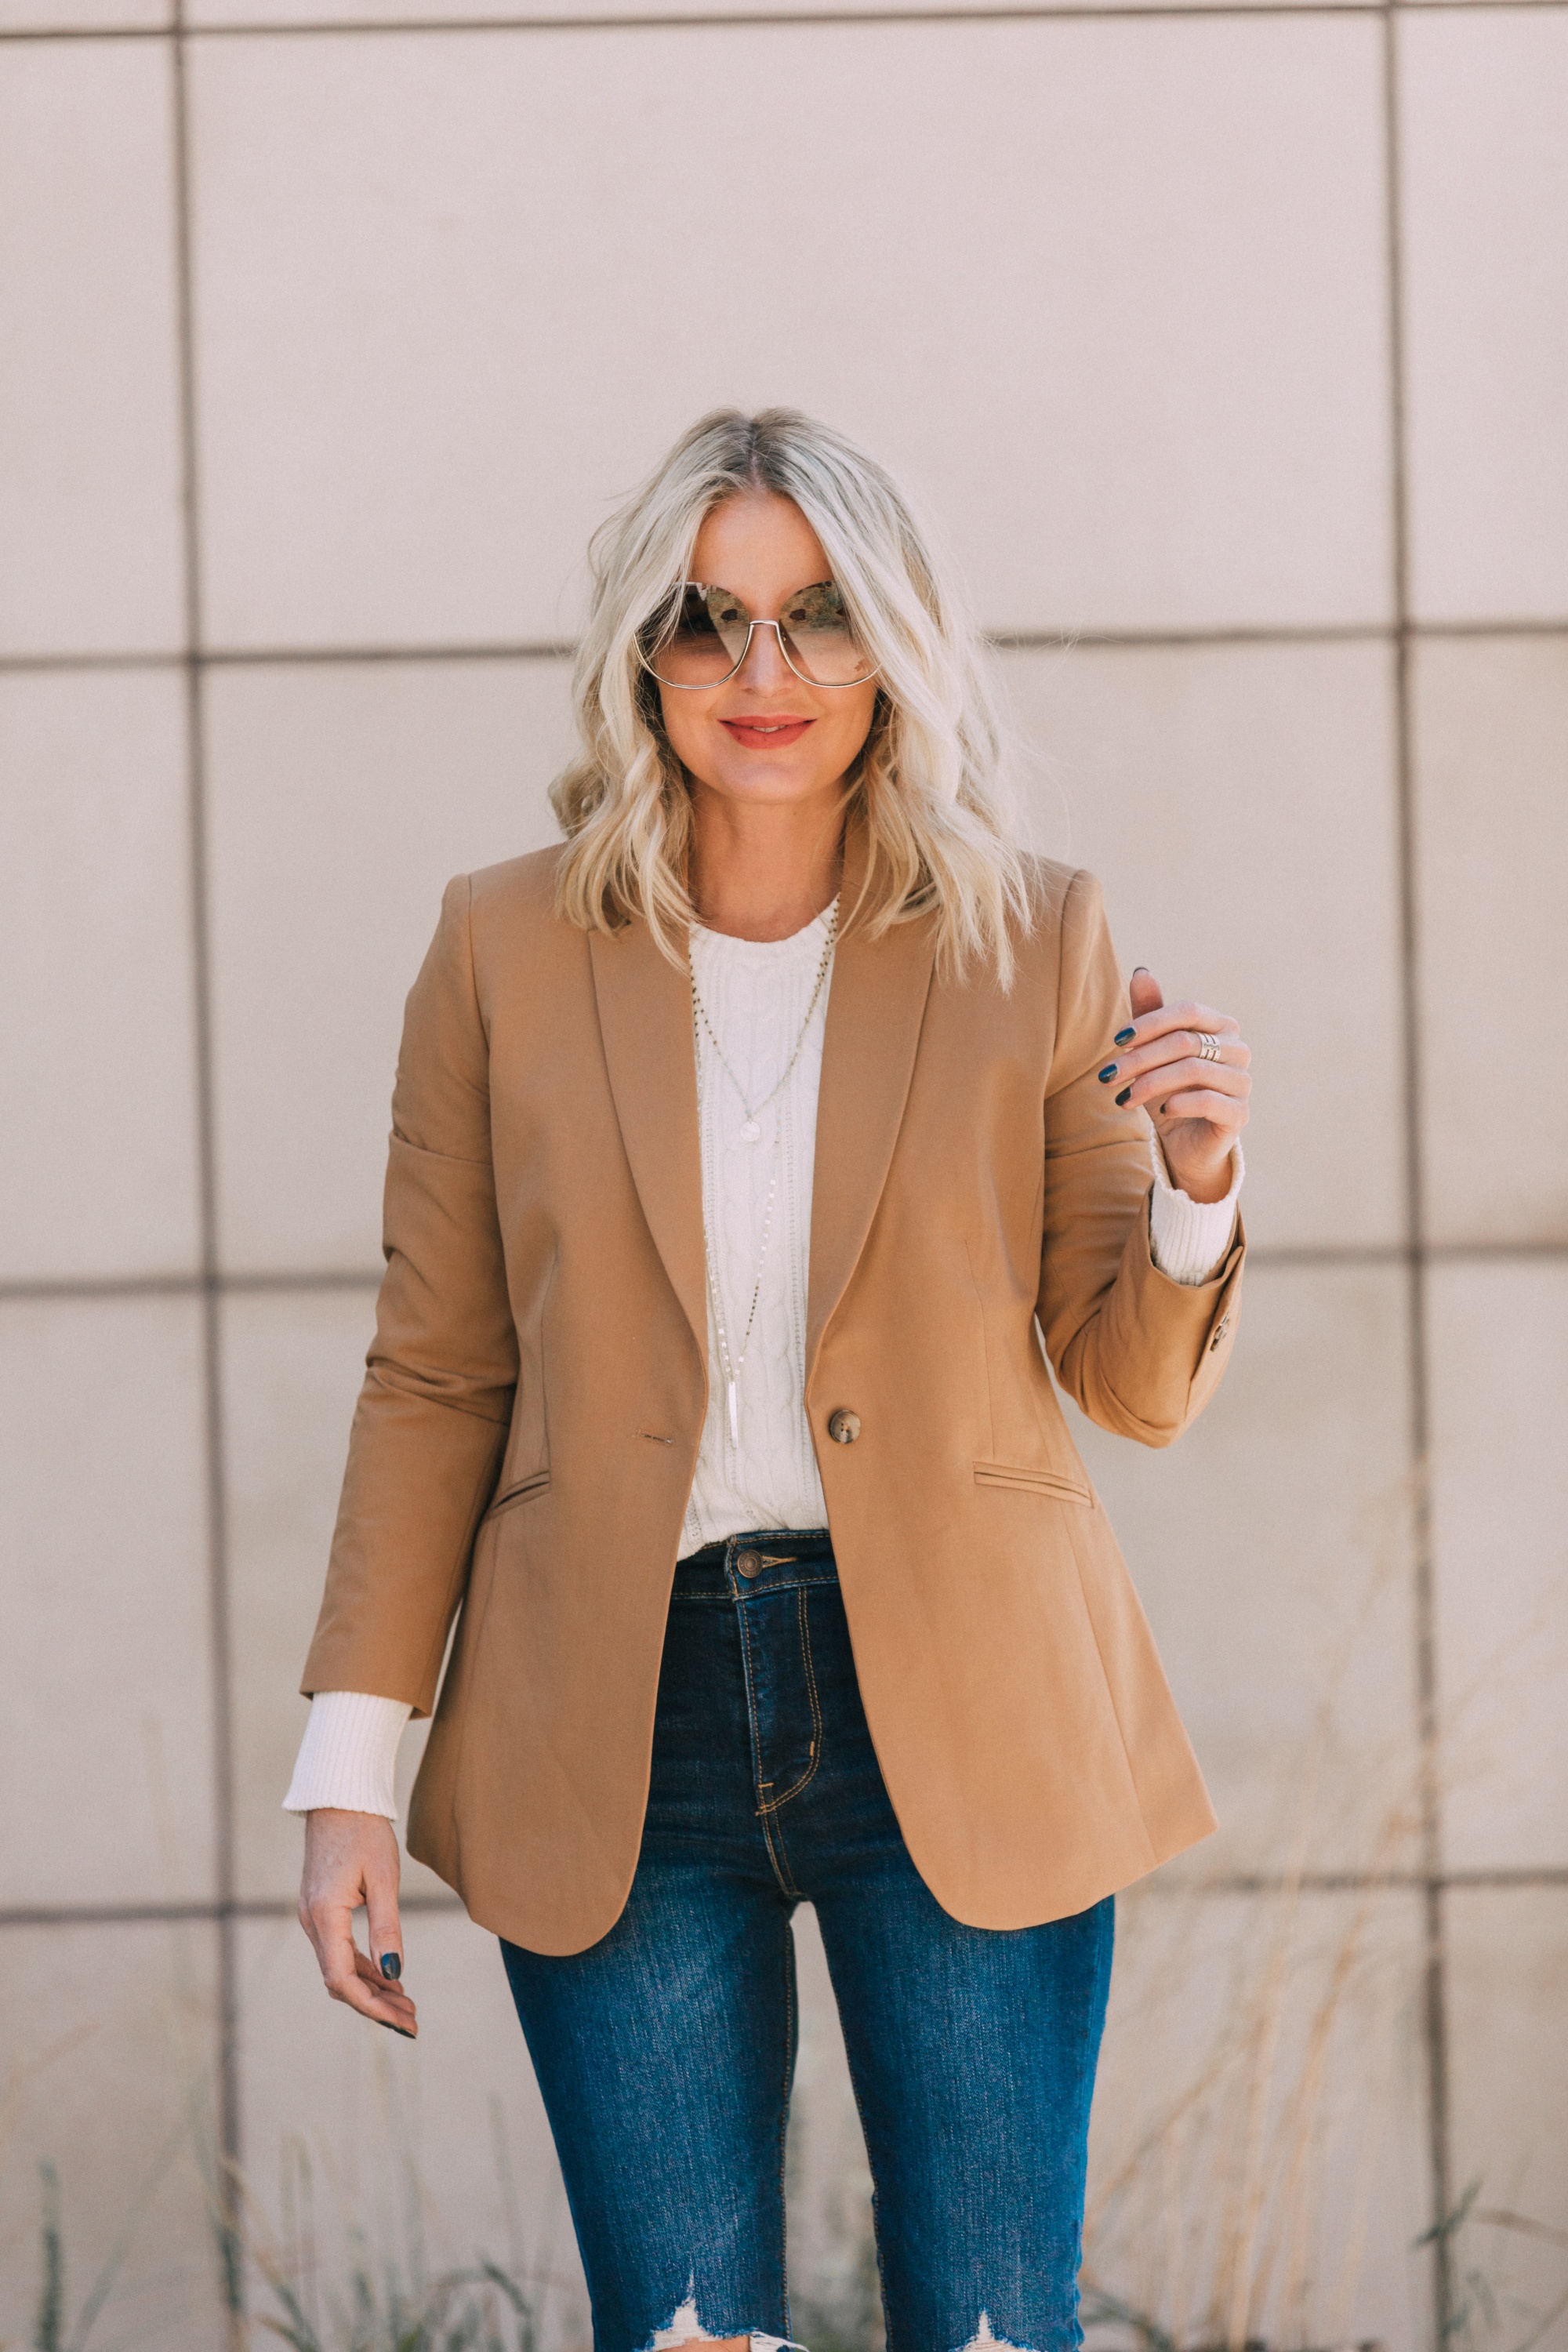 affordable camel colored blazer with blue jeans and white cable knit sweater outfit